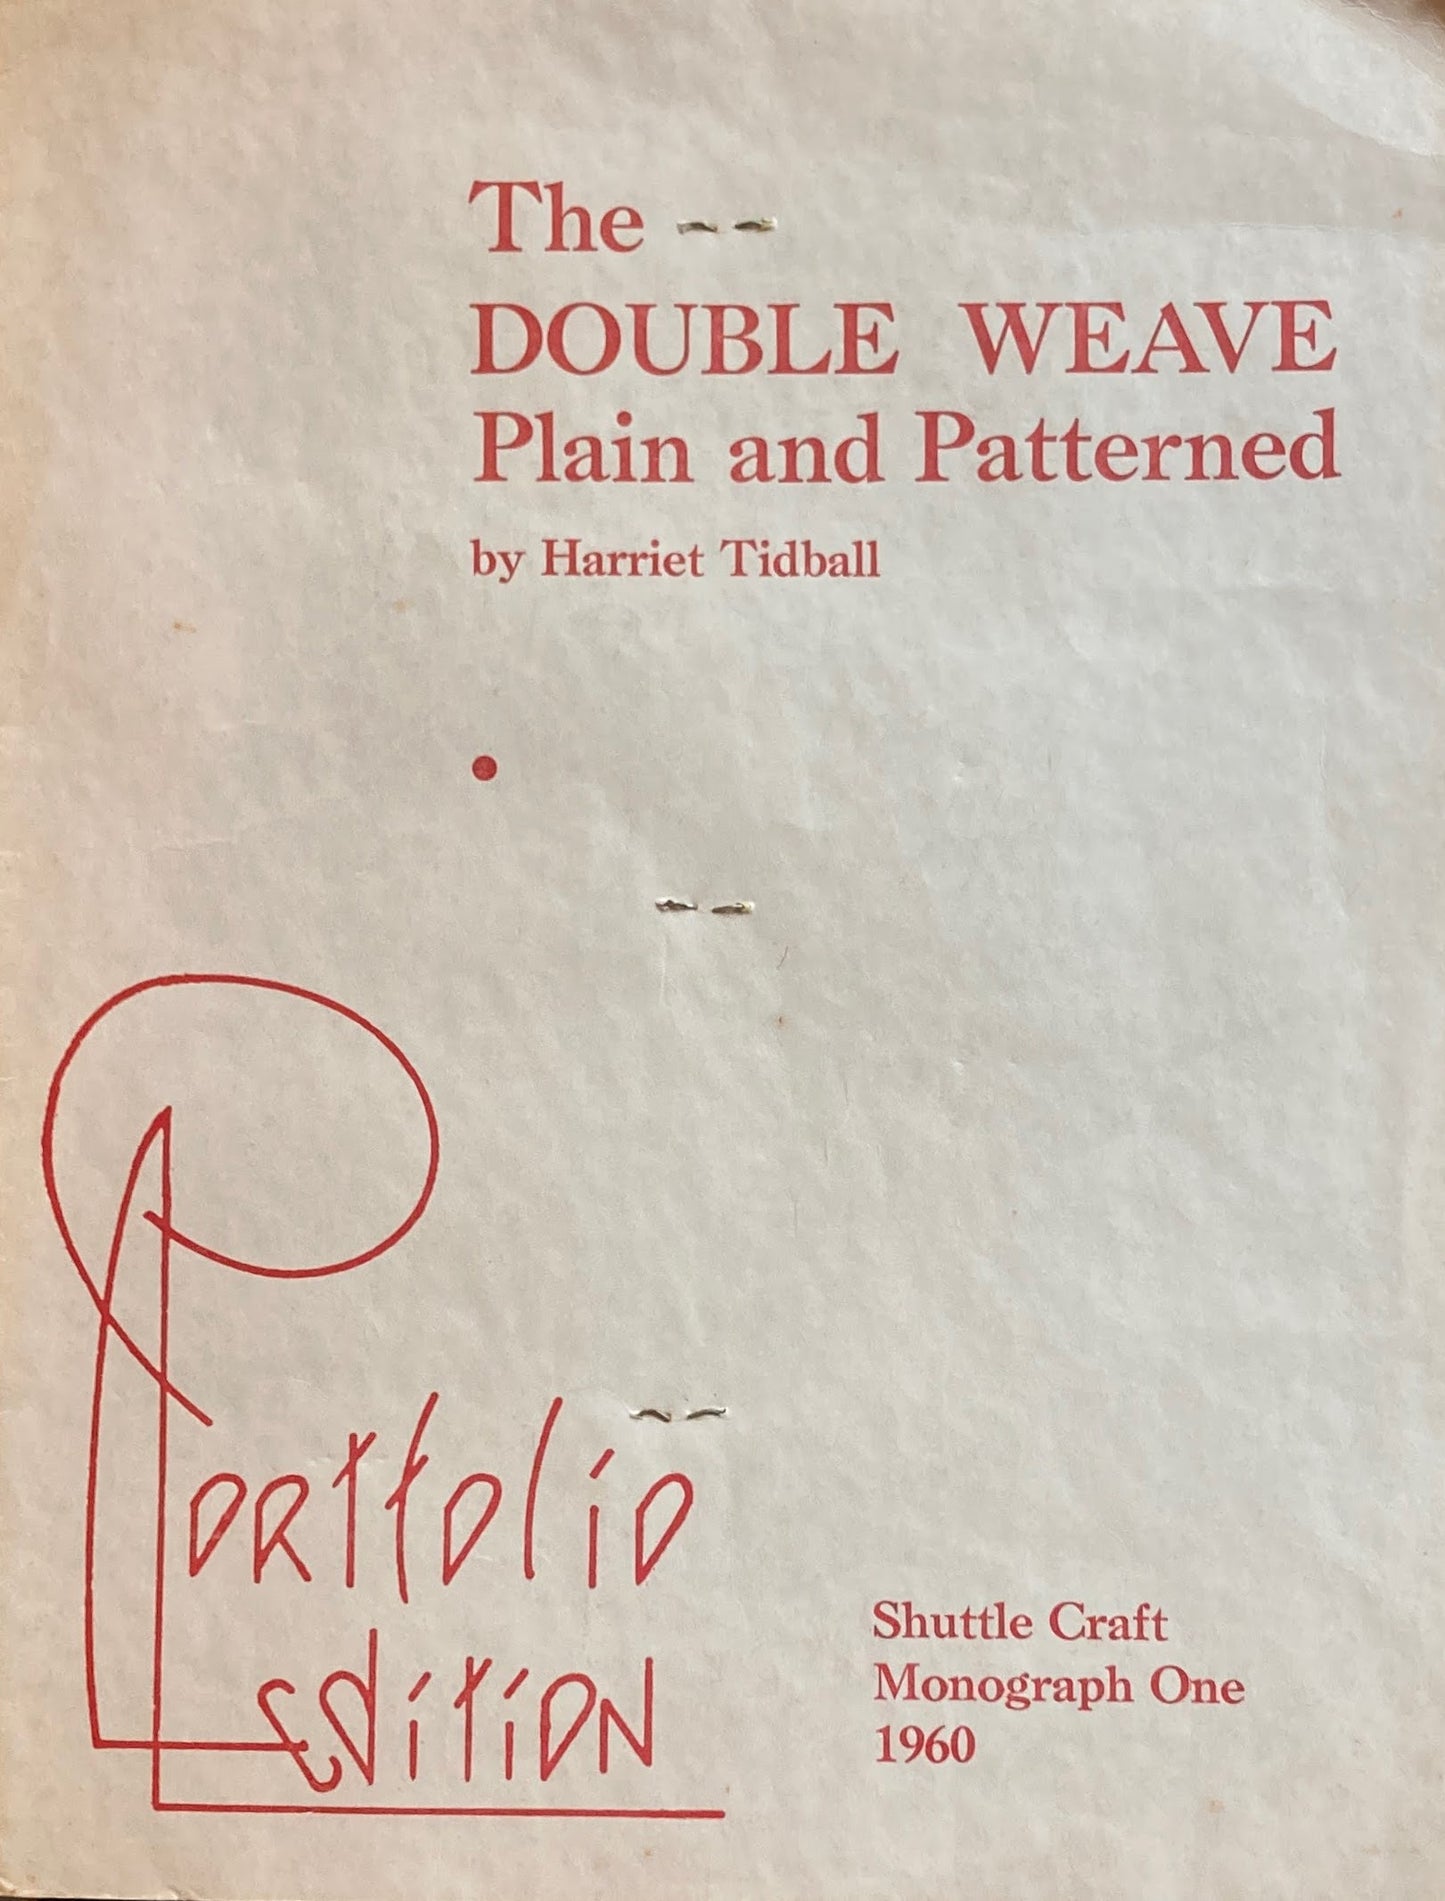 The Double Weave Plain and Patterned Harriet Tidball　Shuttle Craft Monograph One　1960　Portfolio edition付き　2冊